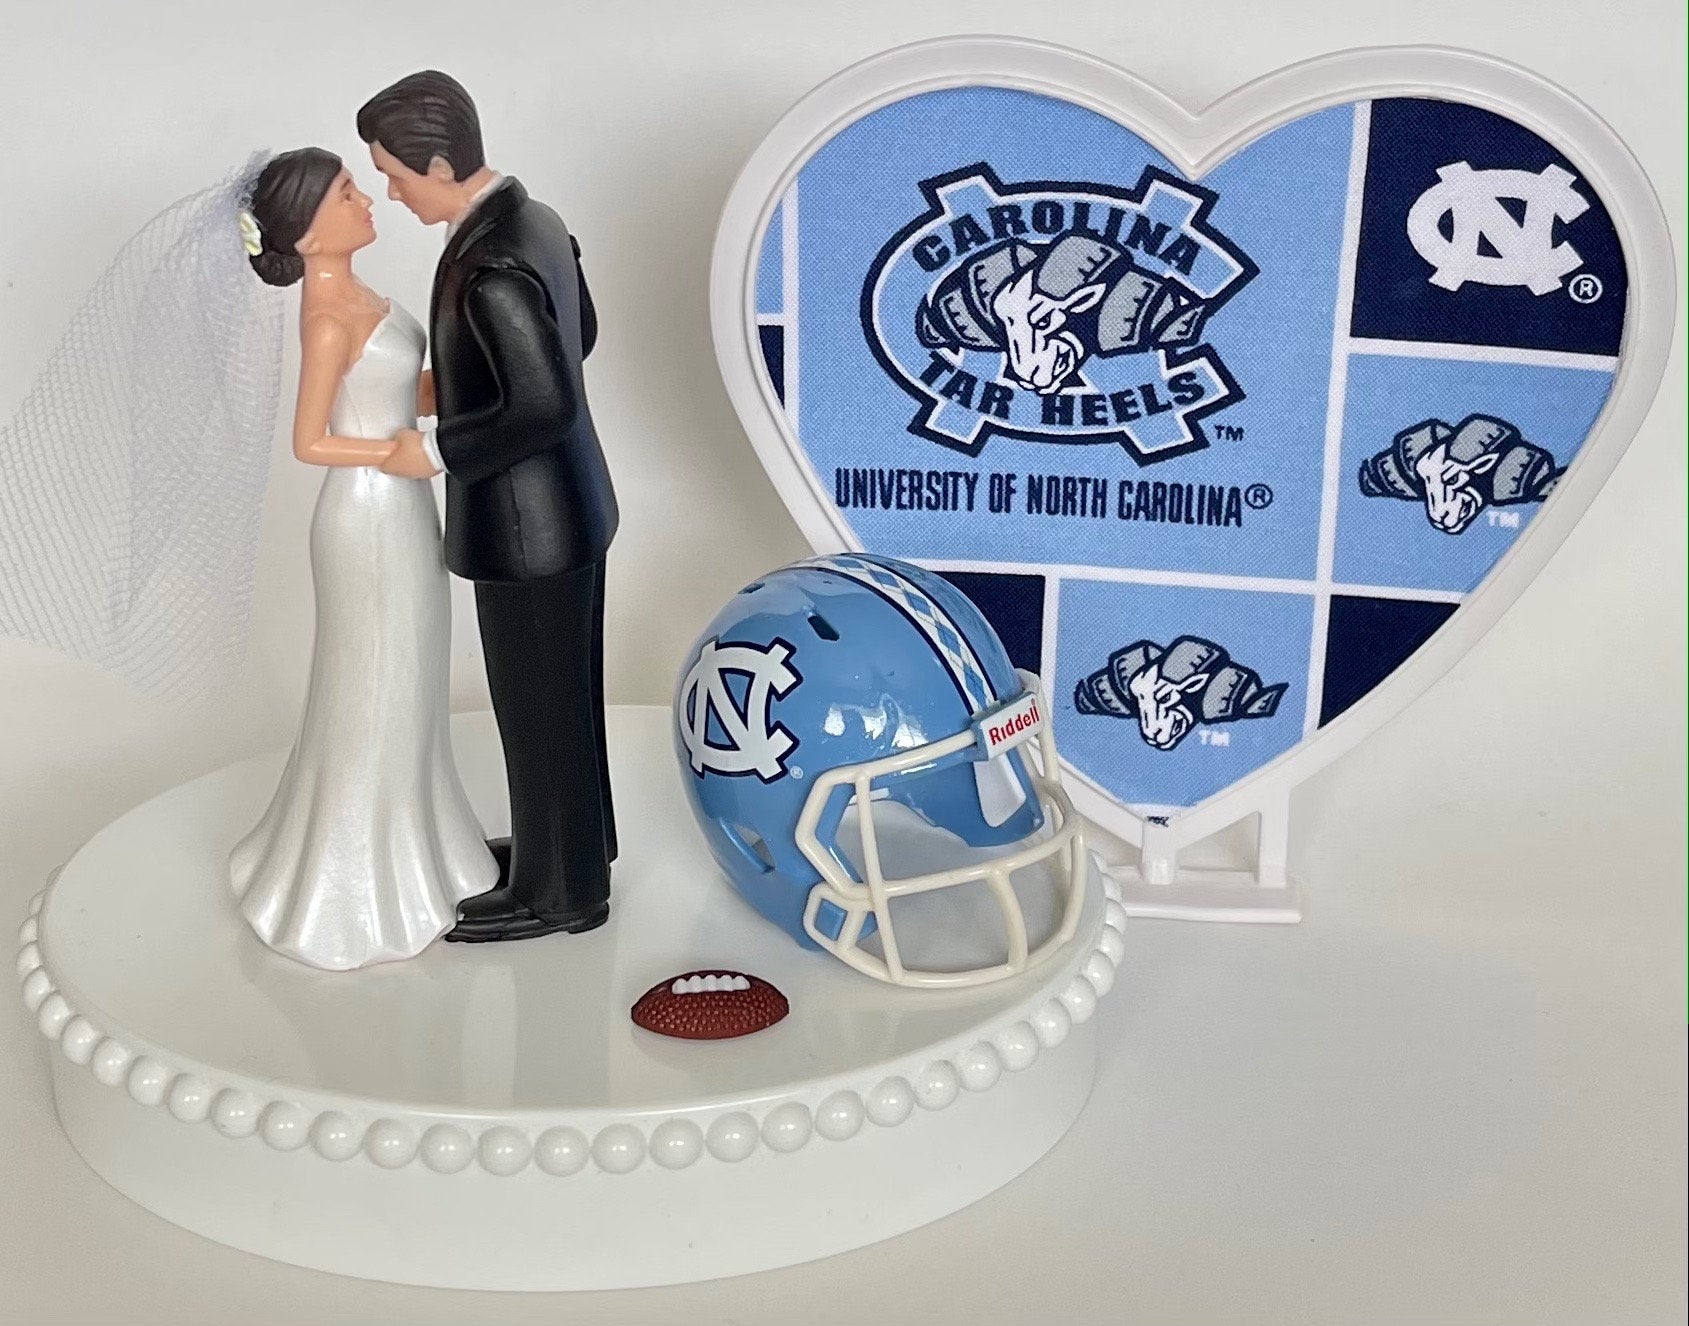 Wedding Cake Topper North Carolina Tar Heels Football Themed Pretty Short-Haired Bride Groom One-of-a-Kind Sports Fan Cake Top Shower Gift